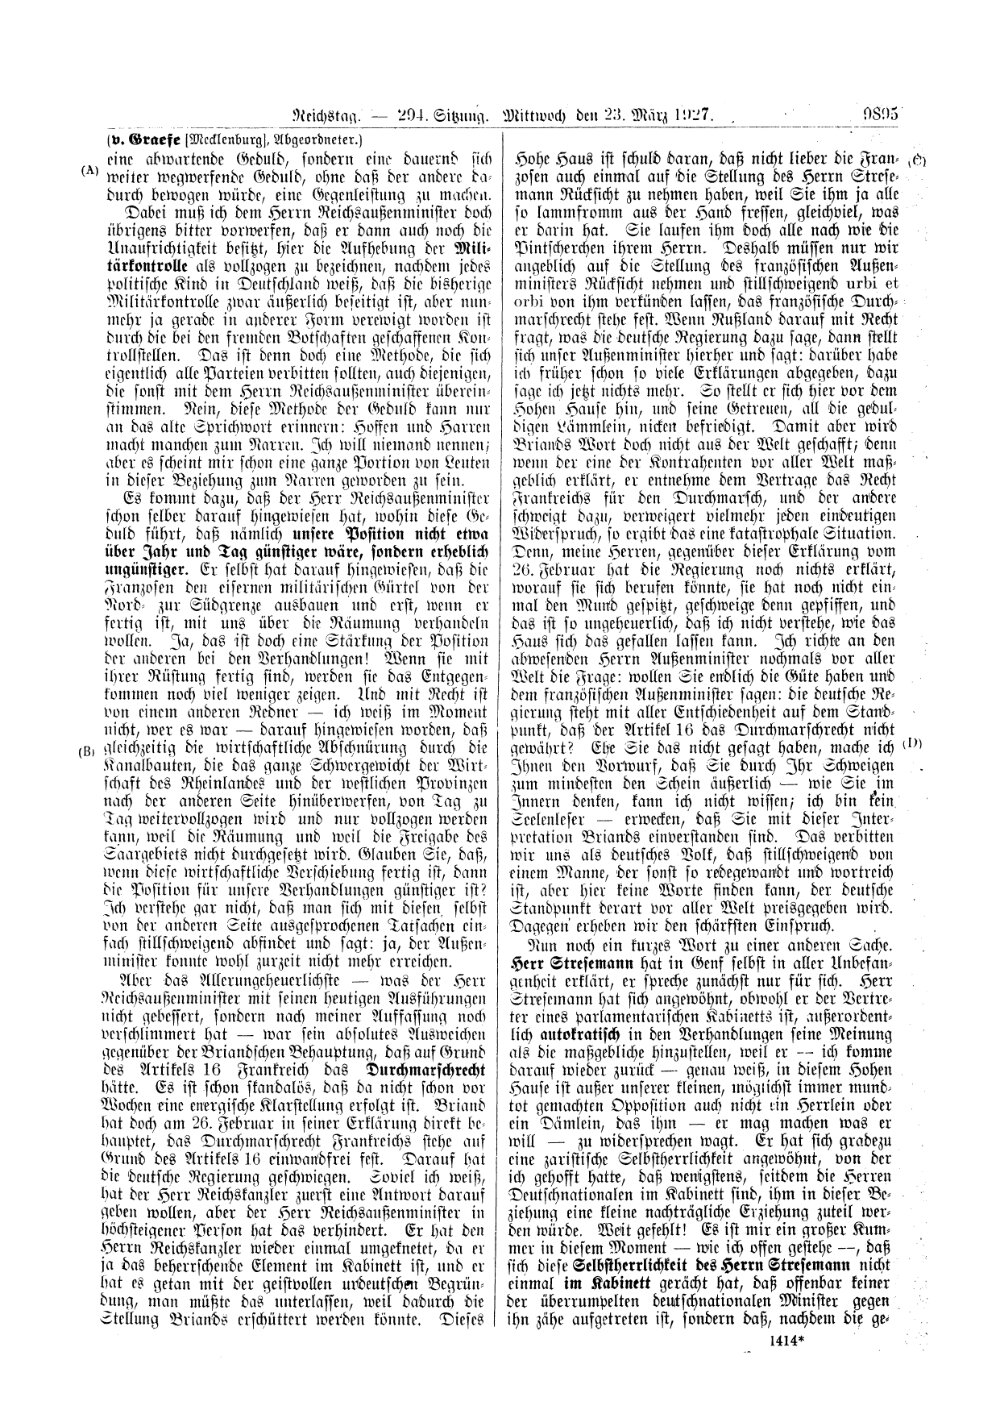 Scan of page 9895